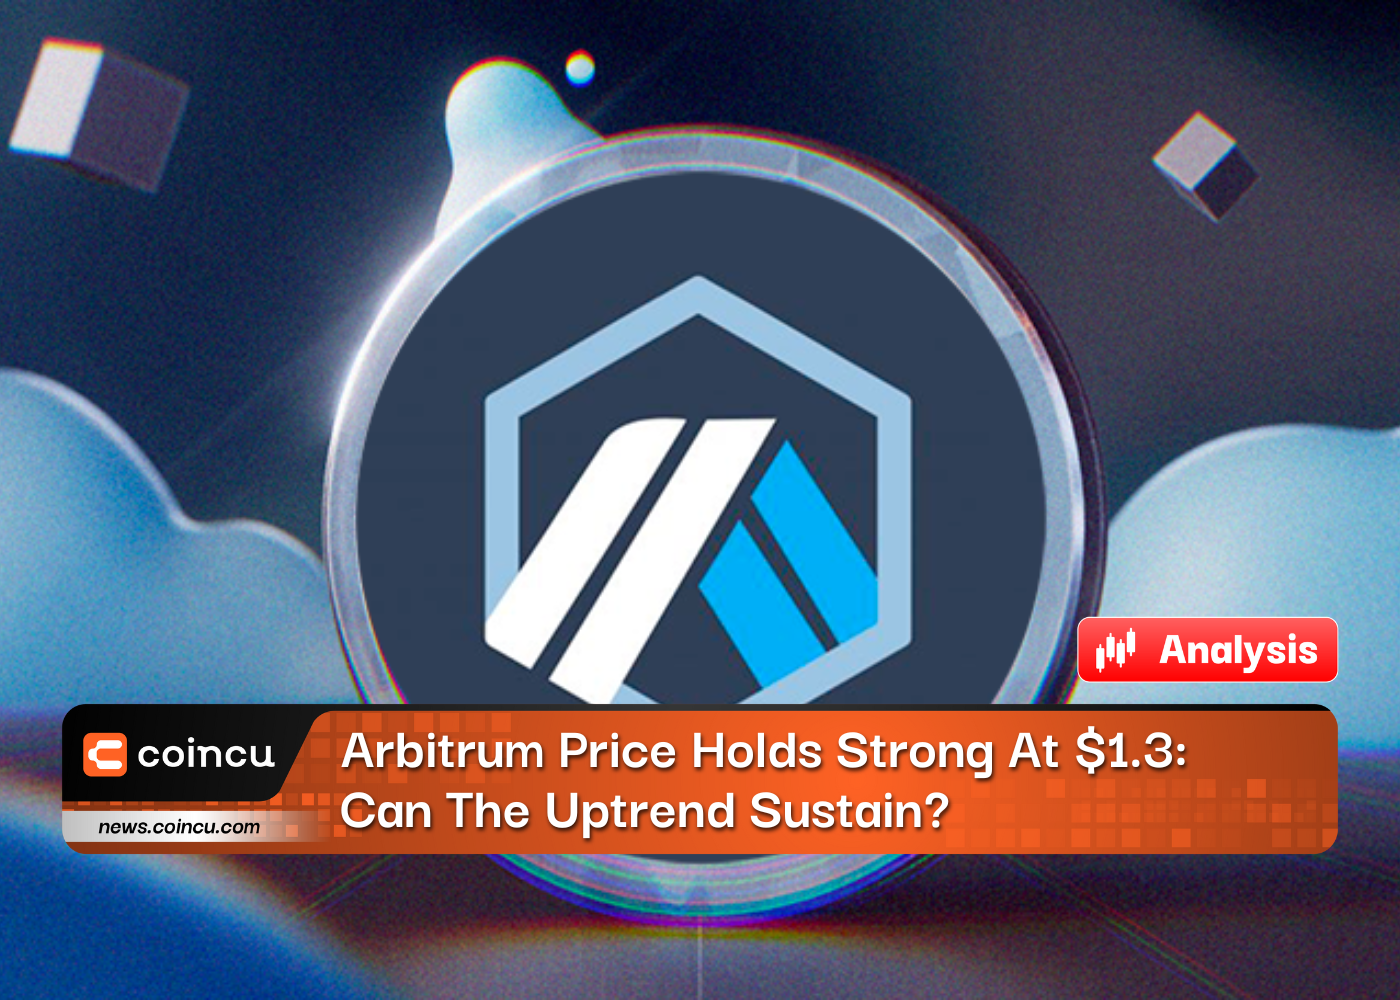 Arbitrum Price Holds Strong At $1.3: Can The Uptrend Sustain?